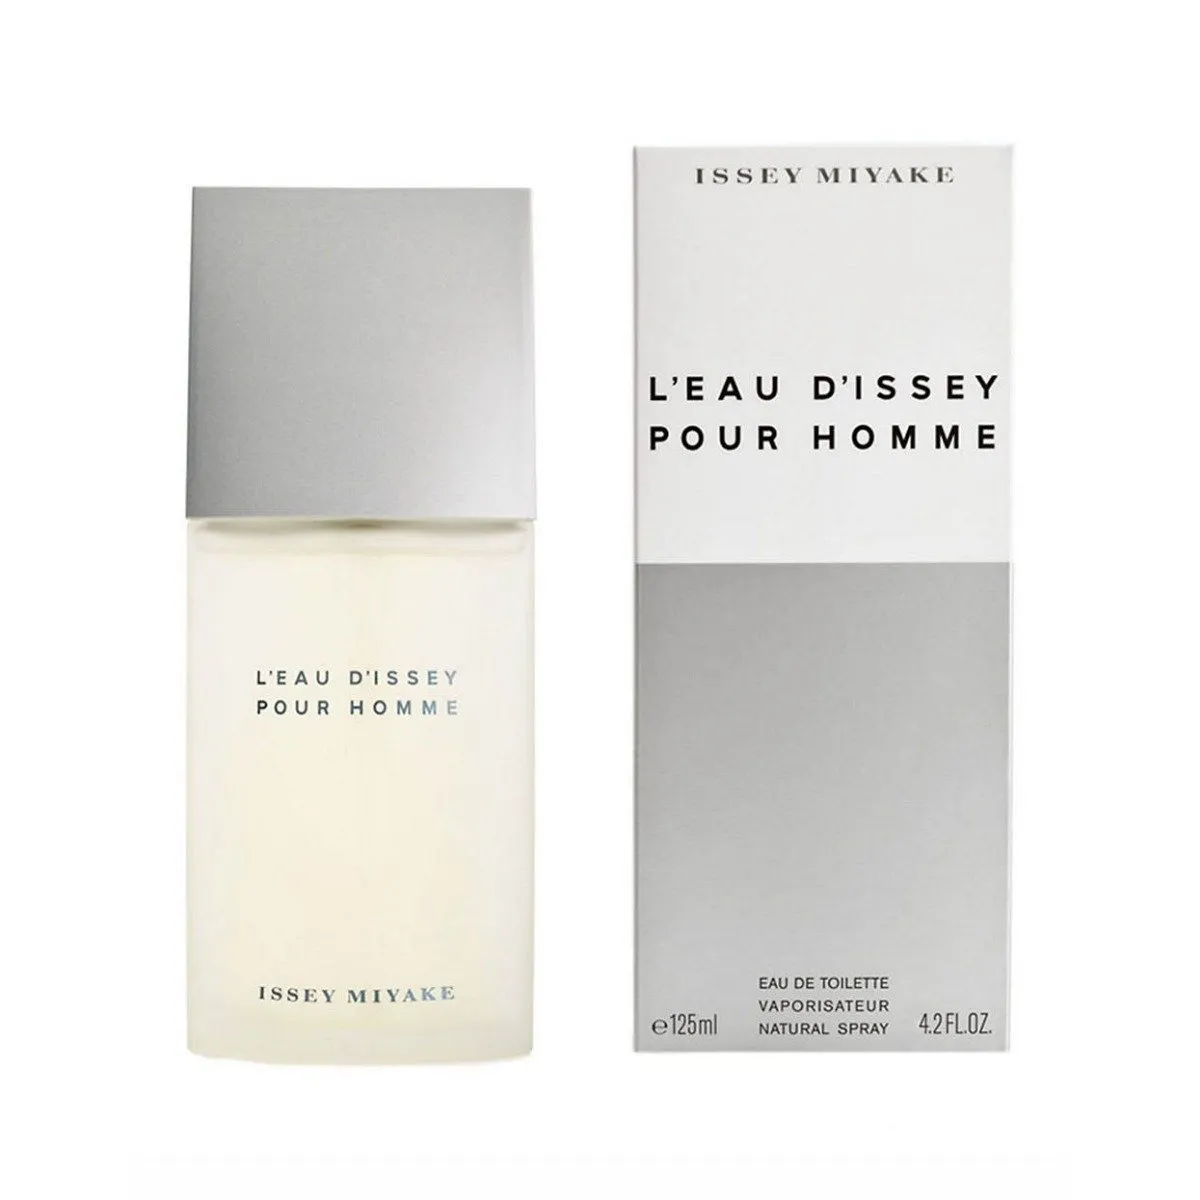 L'eau D'Issey Pour Homme by Issey Miyake  -INSPIRACION